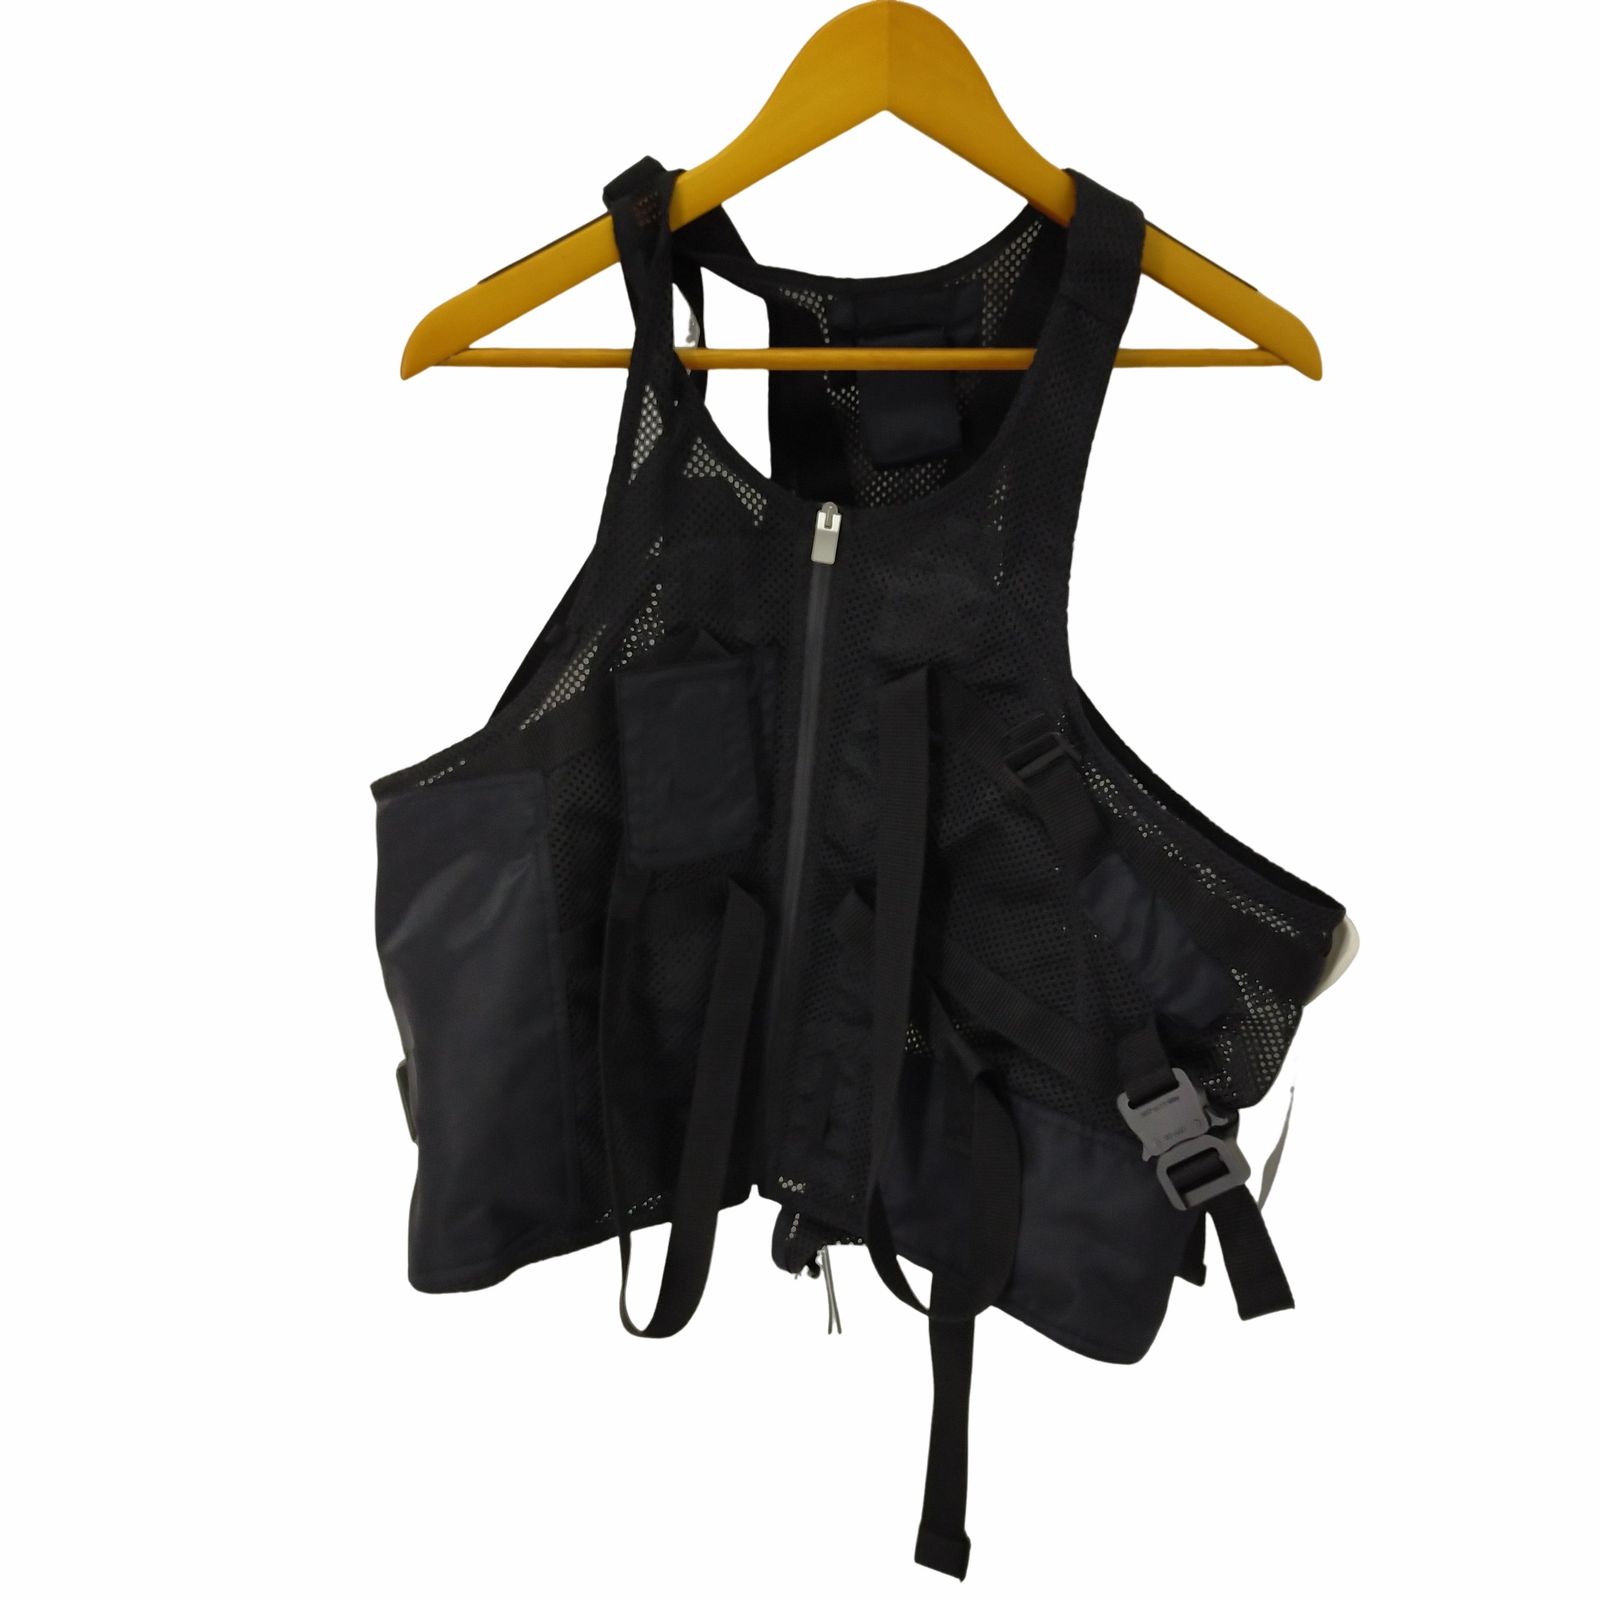 1017 ALYX 9SM TACTICAL VEST 19aw